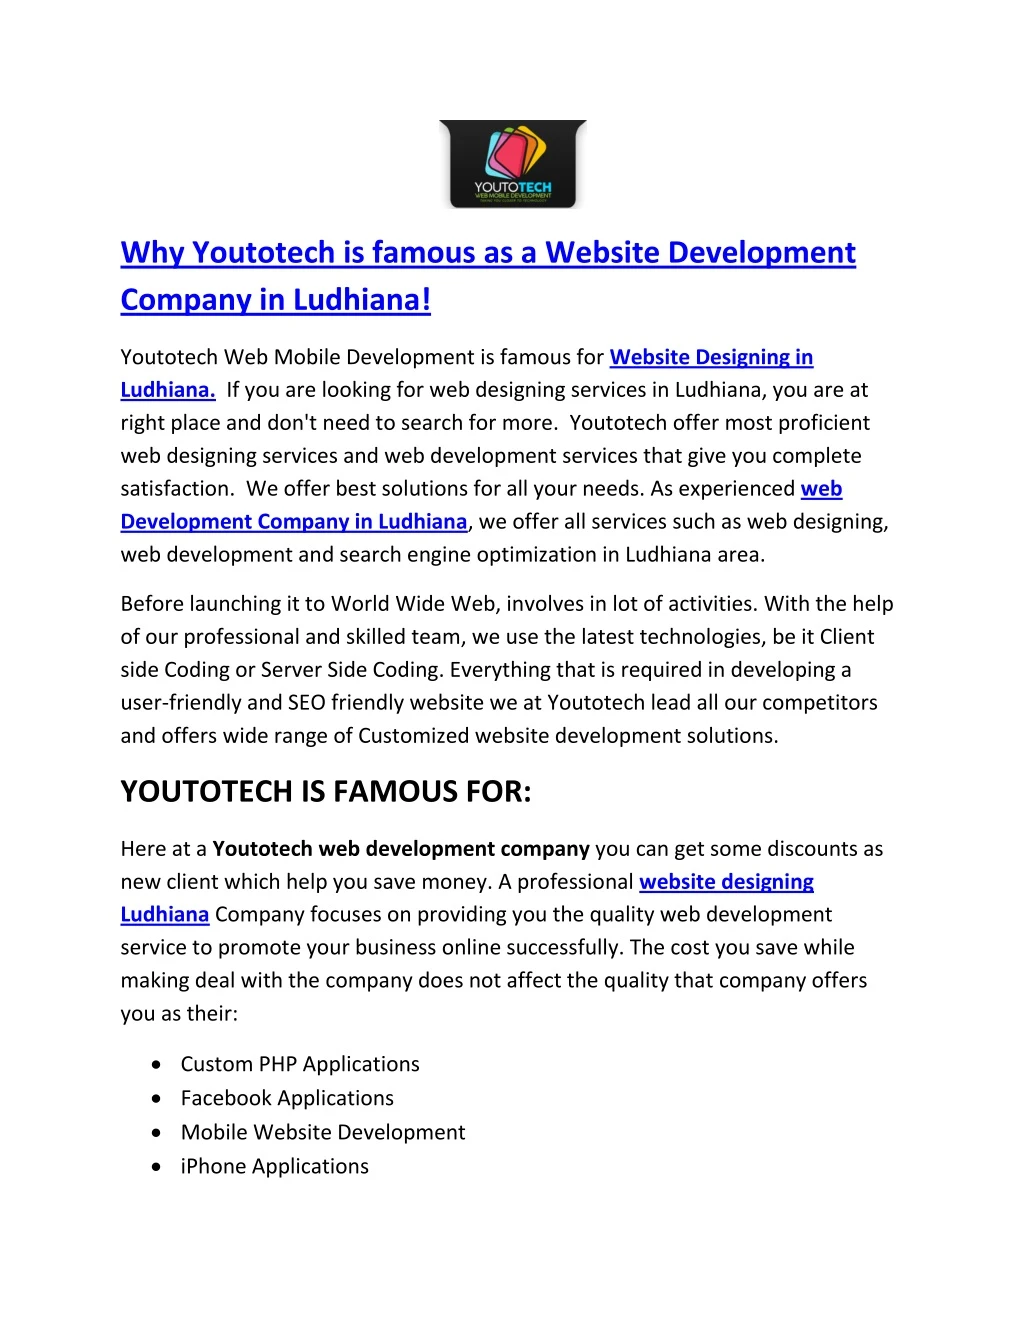 why youtotech is famous as a website development